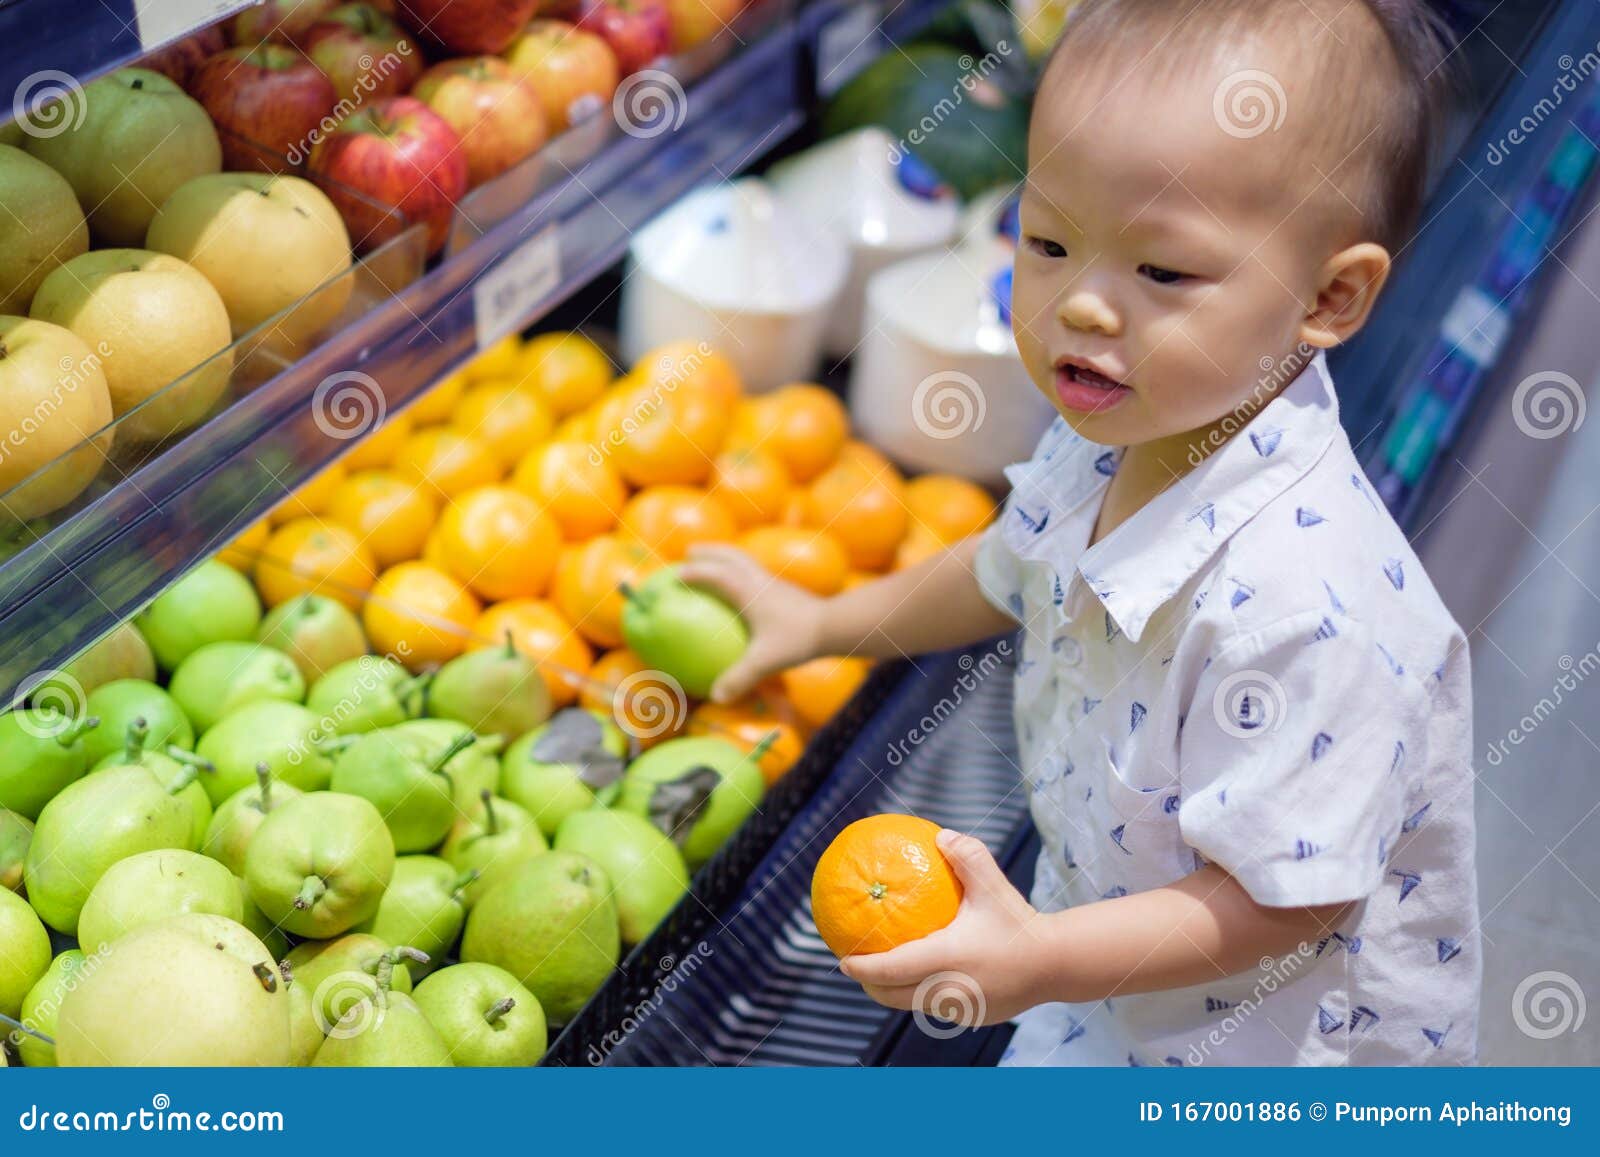 cute little asian 18 months / 1 year old toddler baby boy child shopping in a supermarket